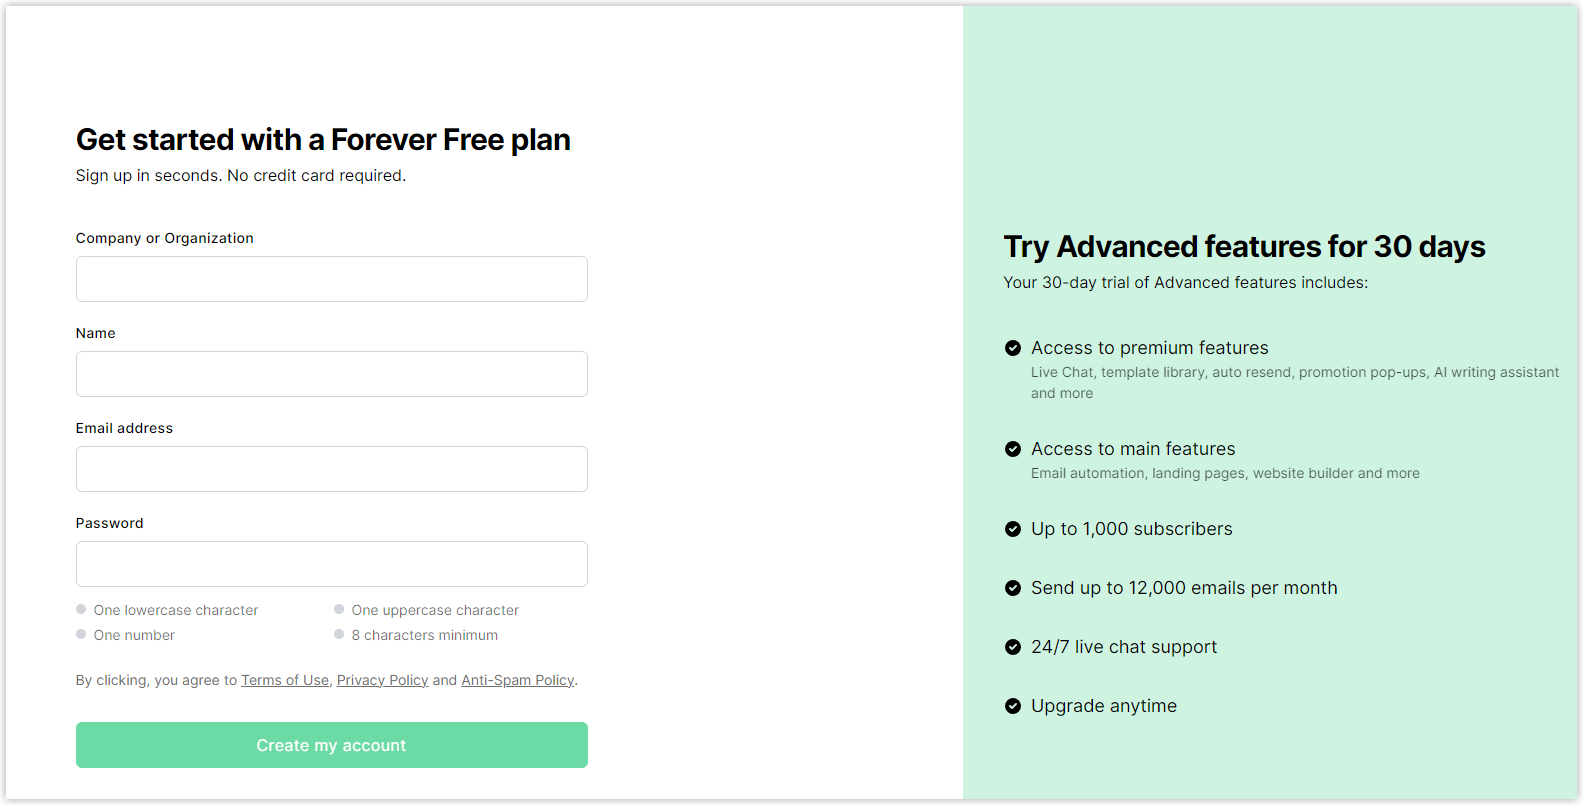 How to design high-converting sign-up forms 